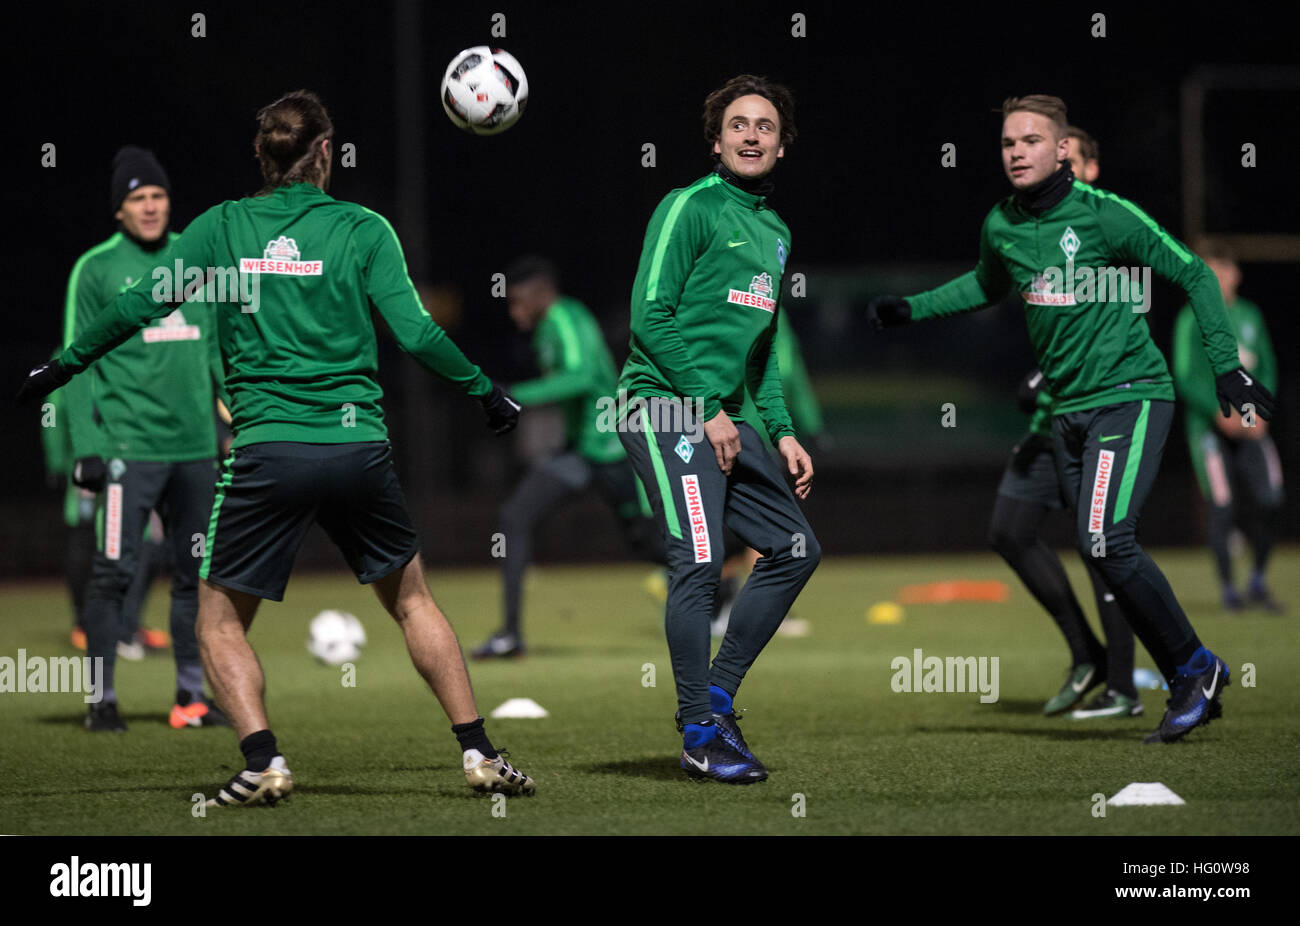 Bremen, Germany. 2nd Jan, 2017. Clemens Fritz (l-r), Max Kruse and new team member Thomas Delaney of the Bundesliga soccer club Werder Bremen in action during the first training session for the second half of the season in Bremen, Germany, 2 January 2017. Photo: Ingo Wagner/dpa/Alamy Live News Stock Photo